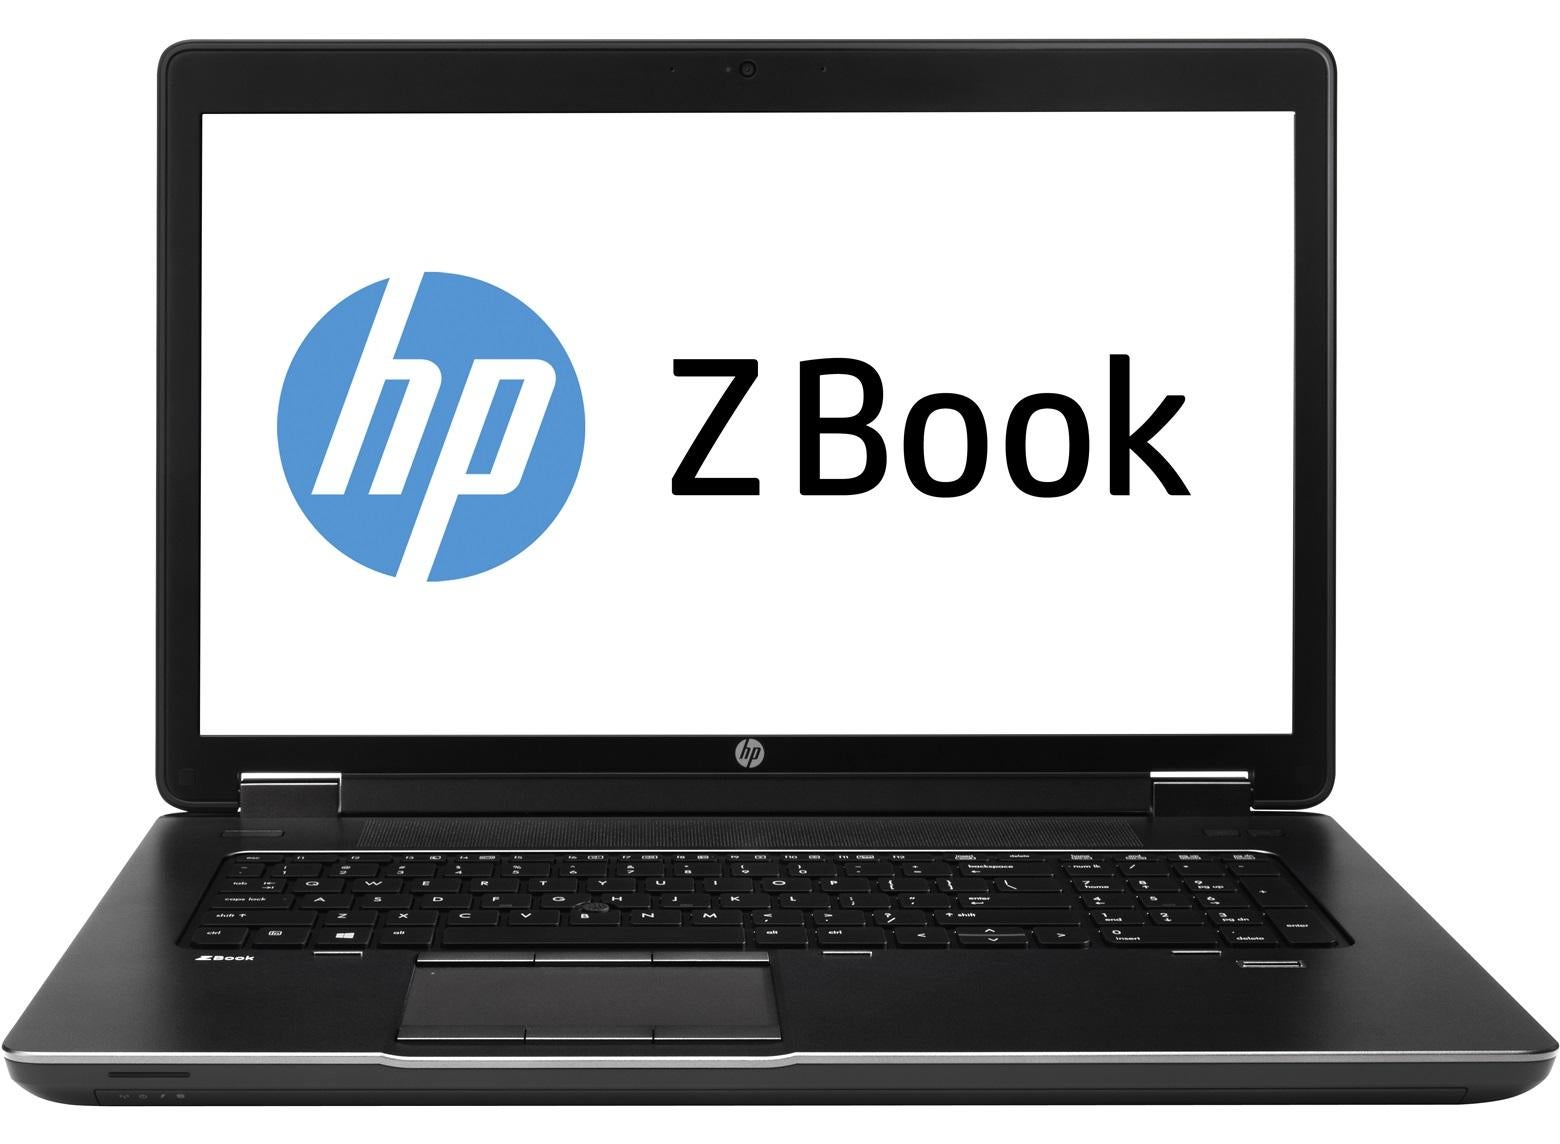 The computer giant sold customers the HP ZBook 17 for just £1.58